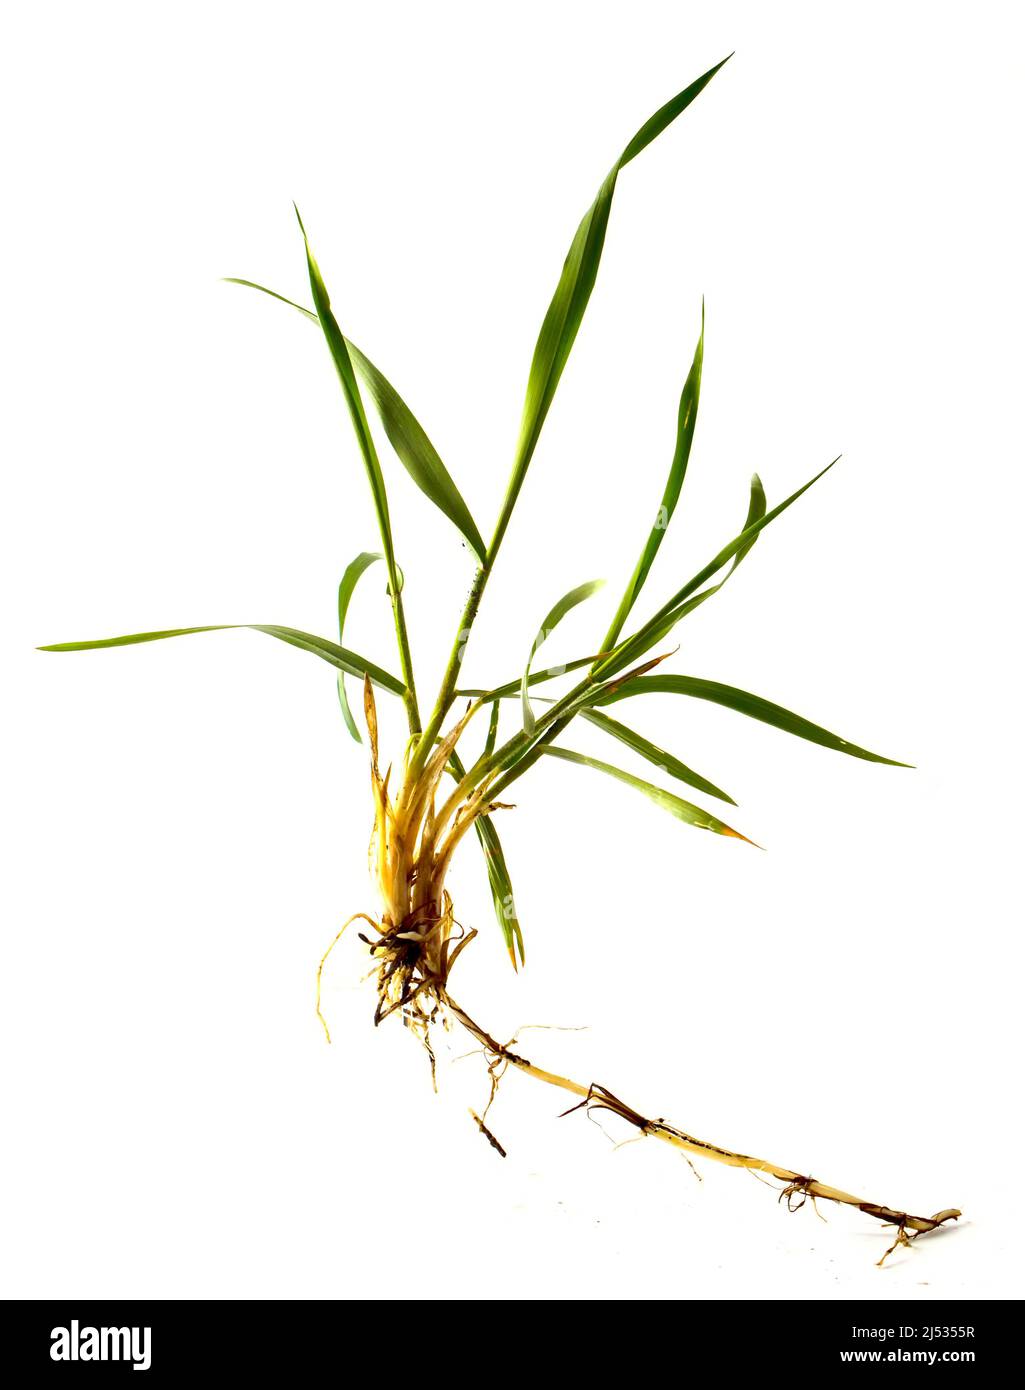 Weed wheatgrass with root isolated on white. Stock Photo